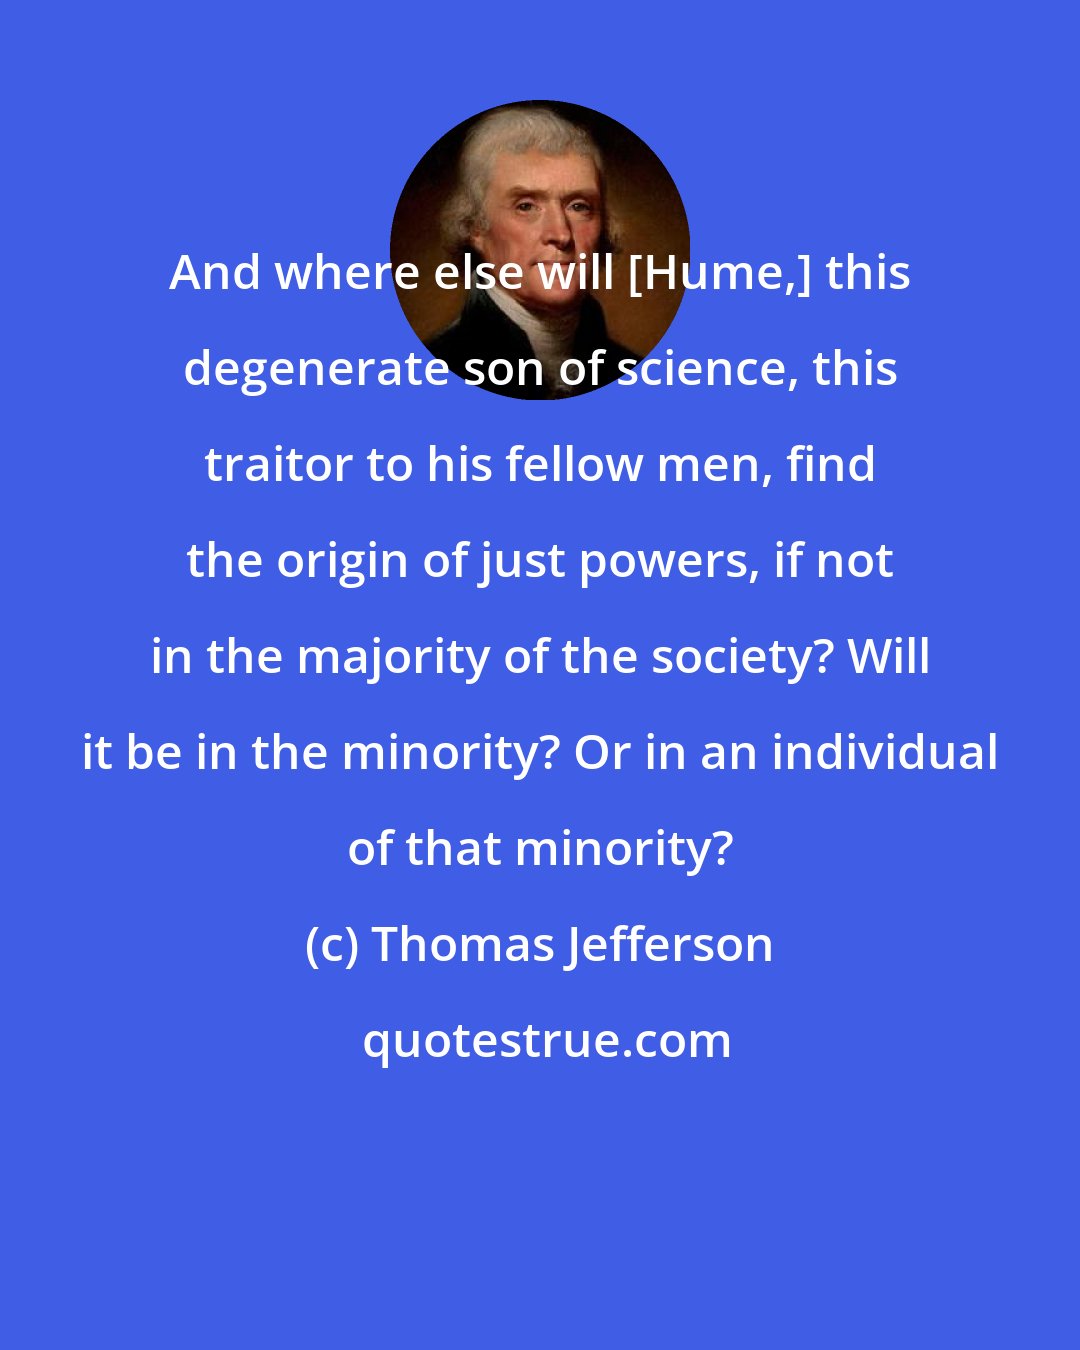 Thomas Jefferson: And where else will [Hume,] this degenerate son of science, this traitor to his fellow men, find the origin of just powers, if not in the majority of the society? Will it be in the minority? Or in an individual of that minority?